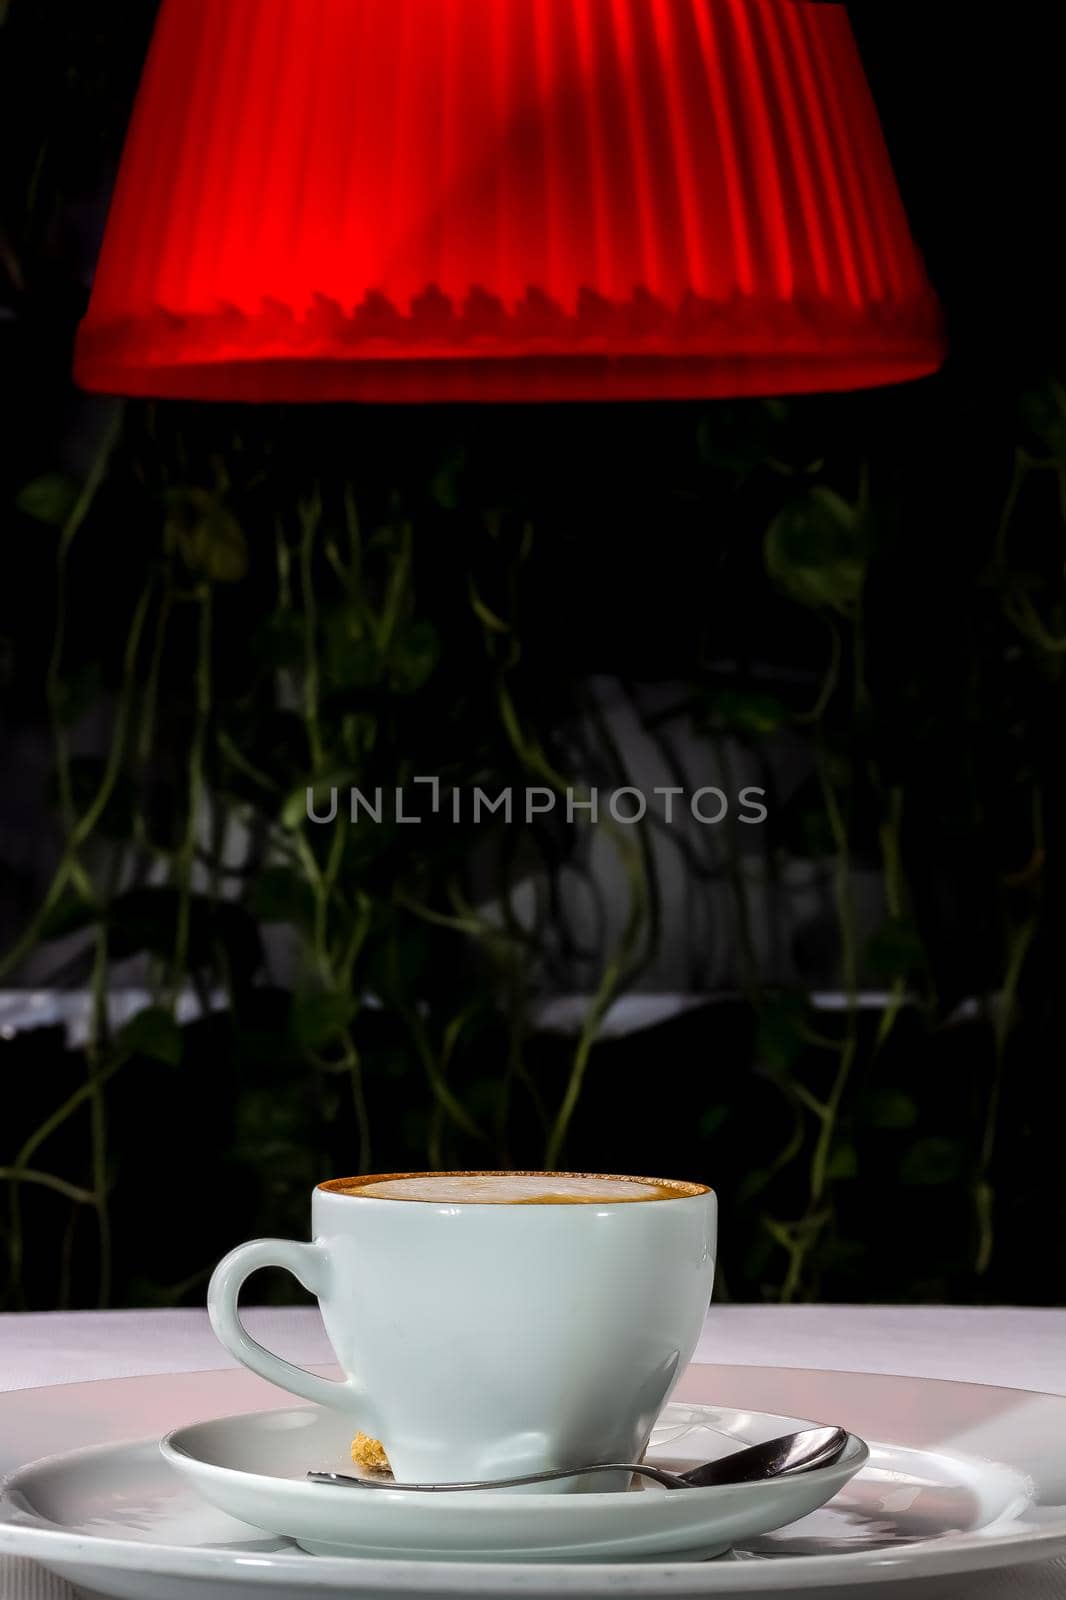 A cup of cappuccino coffee stands on the table at night under a red lampshade. by Milanchikov